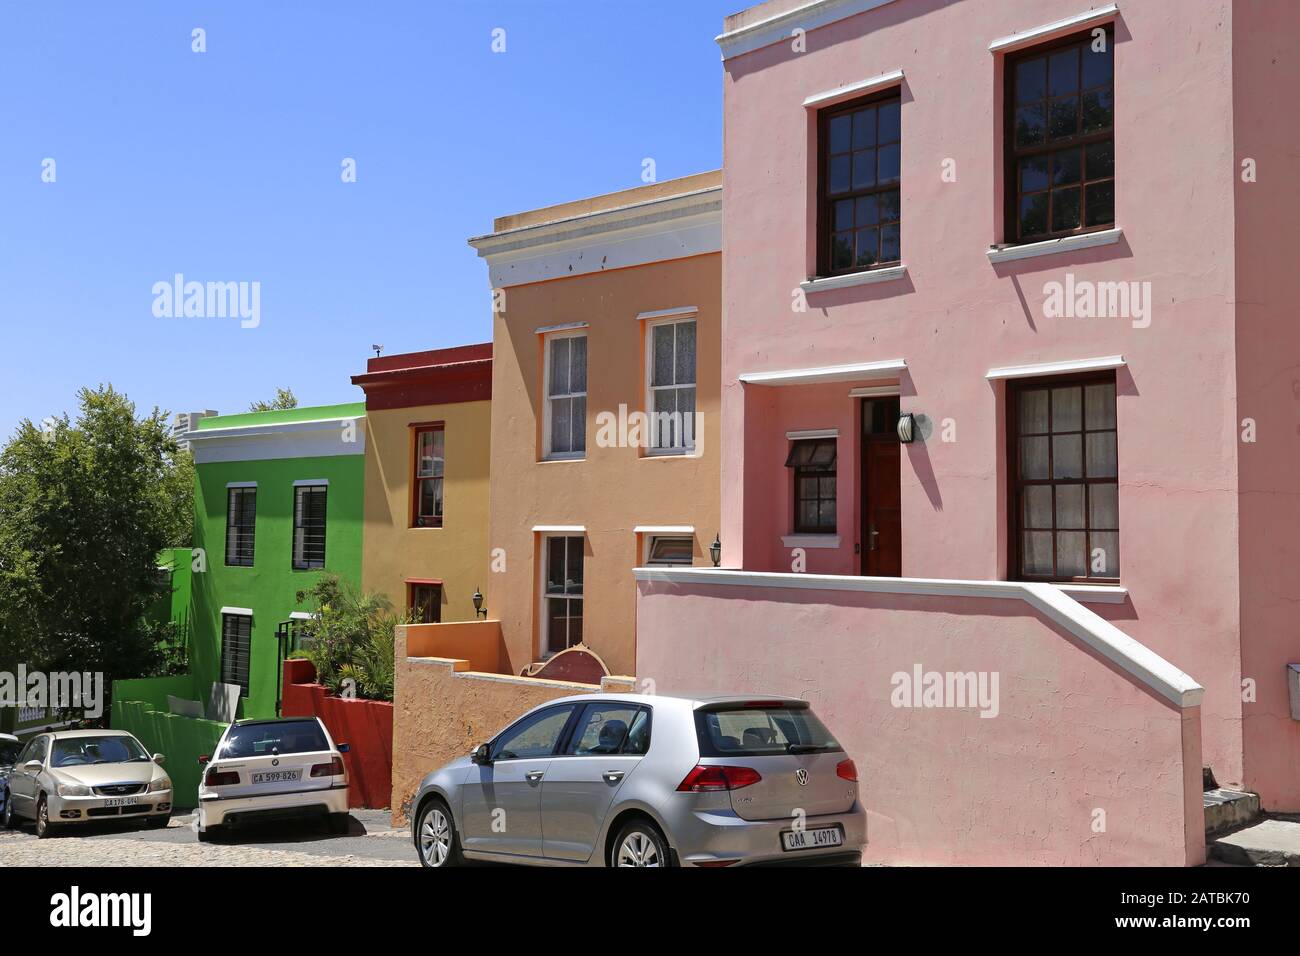 Brightly painted houses, Pentz Street, Bo Kaap, Cape Town, Table Bay, Western Cape Province, South Africa, Africa Stock Photo